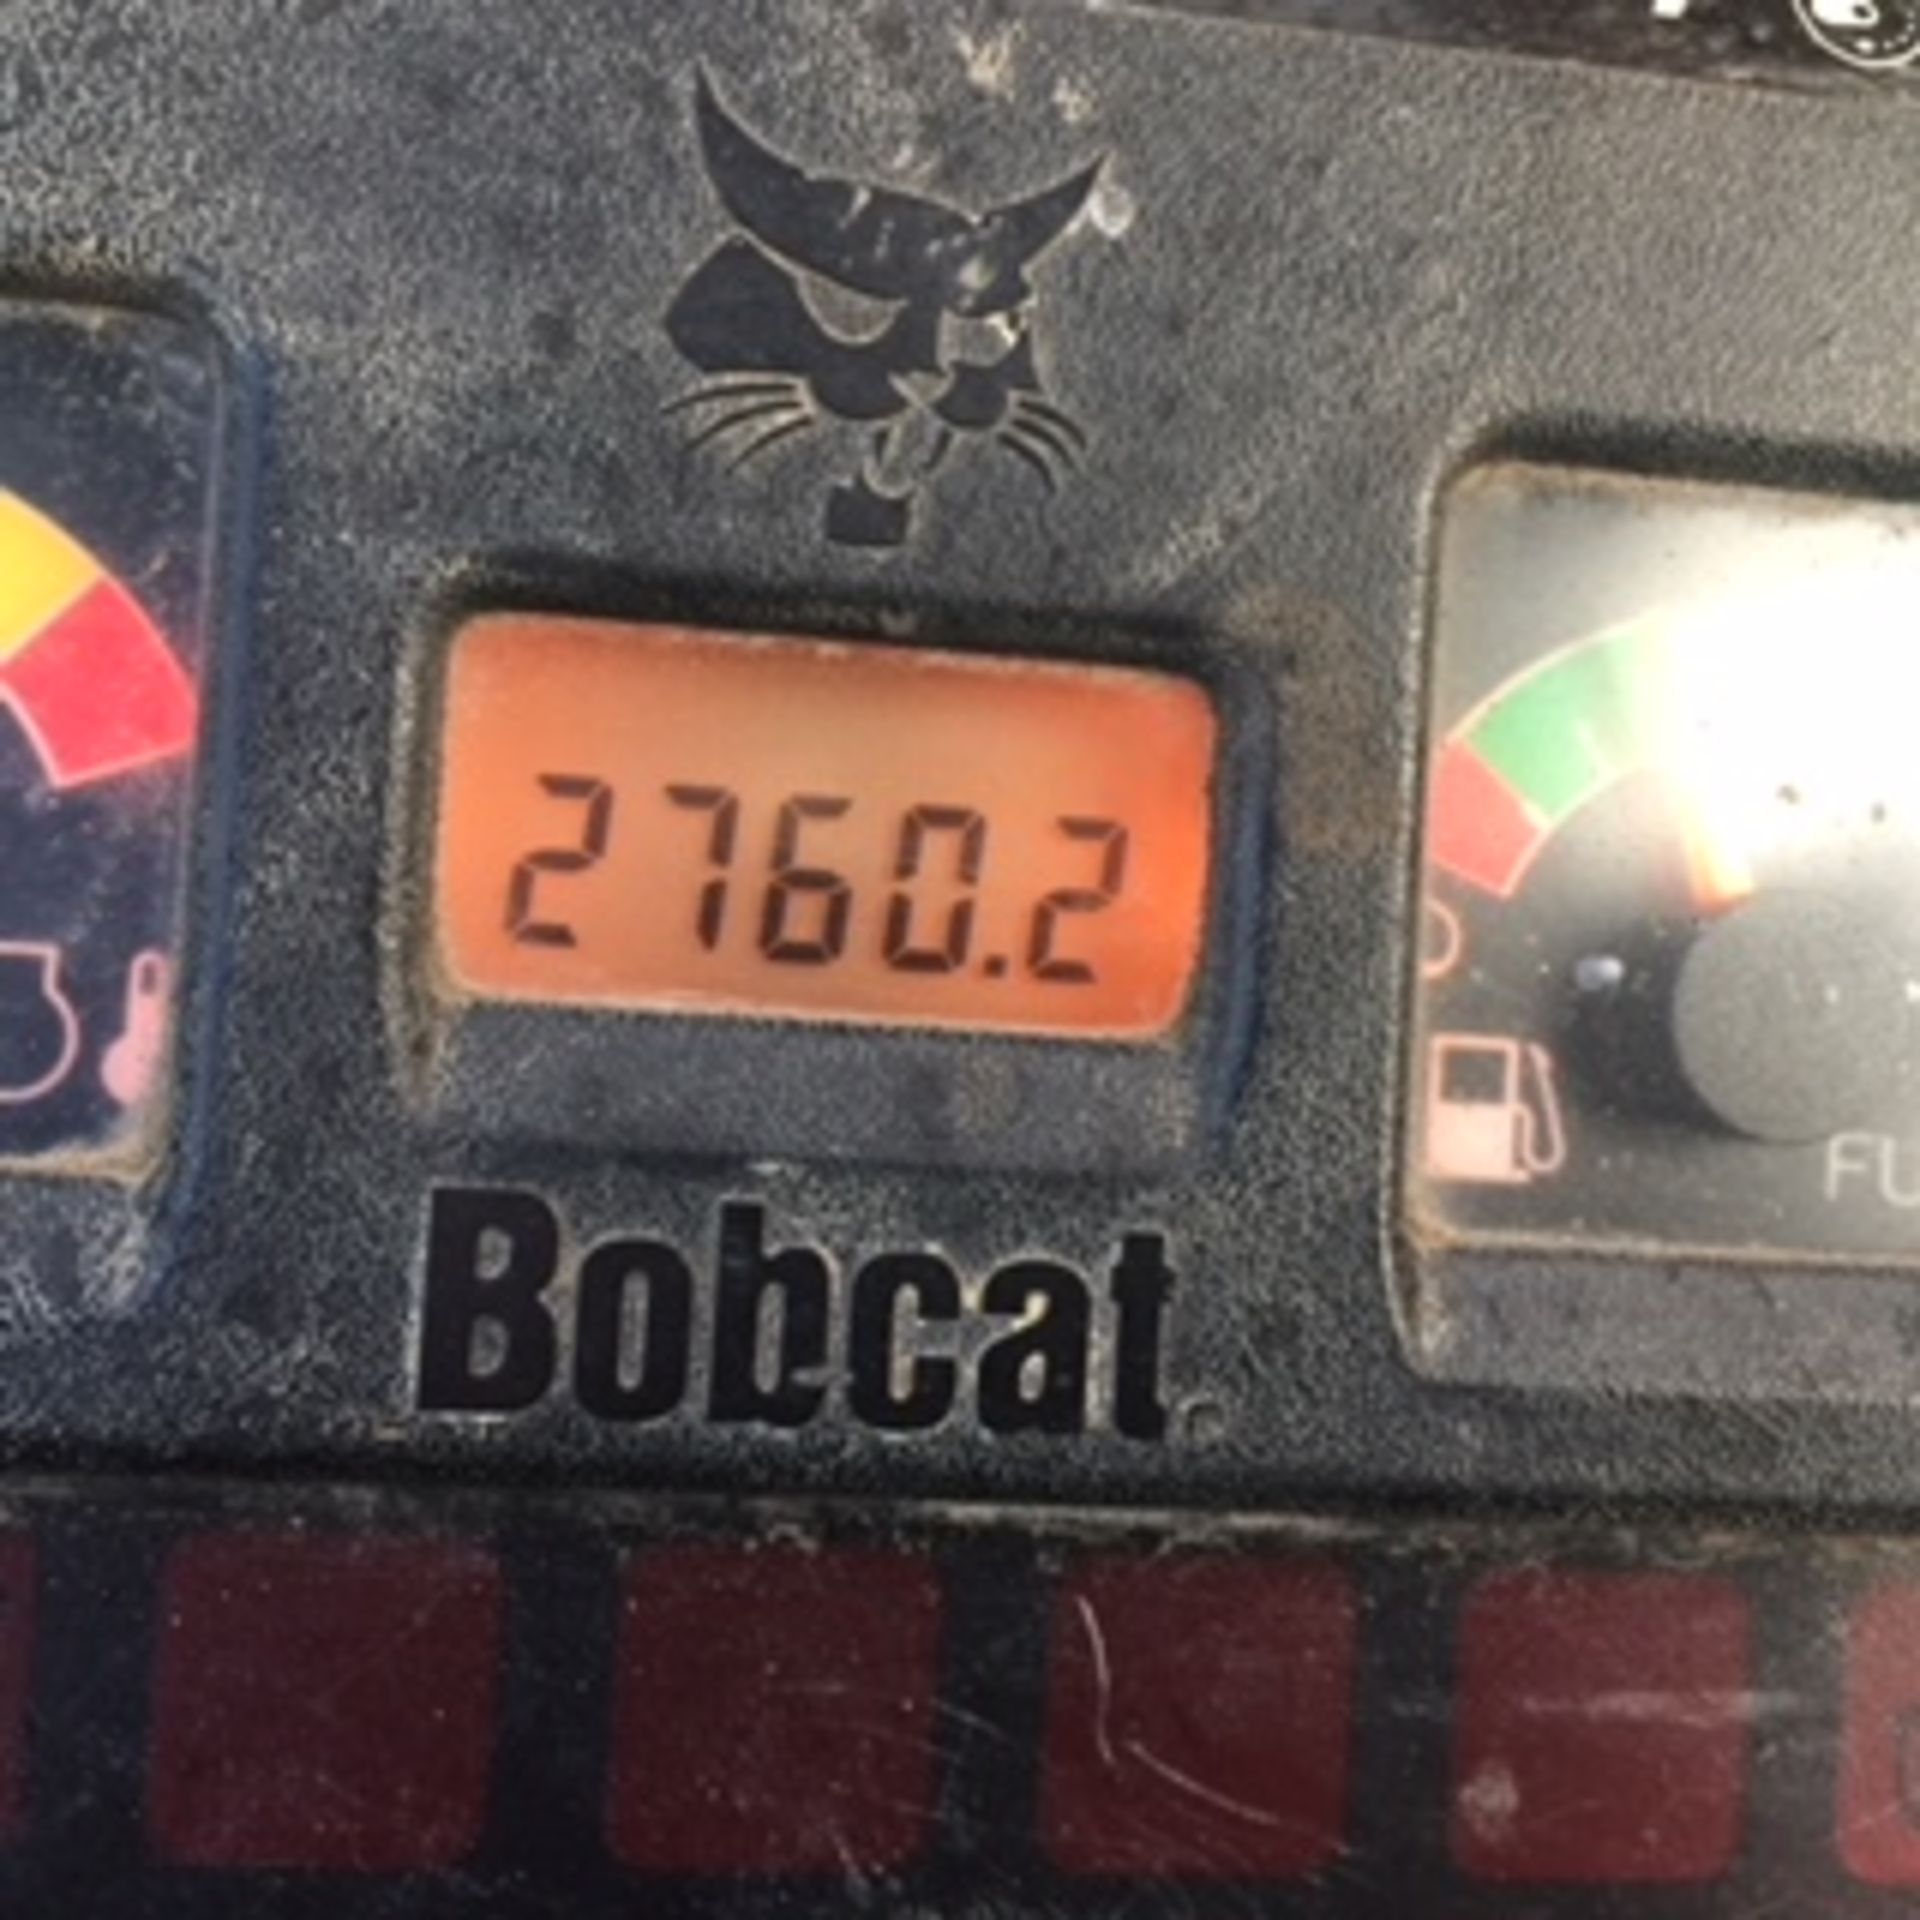 2006 BOBCAT 328G, S/N 234213742, 2760HRS (NOT VERIFIED) C/W 1 BUCKET** VIEWED FROM & SOLD AT G69 6DW - Image 10 of 10